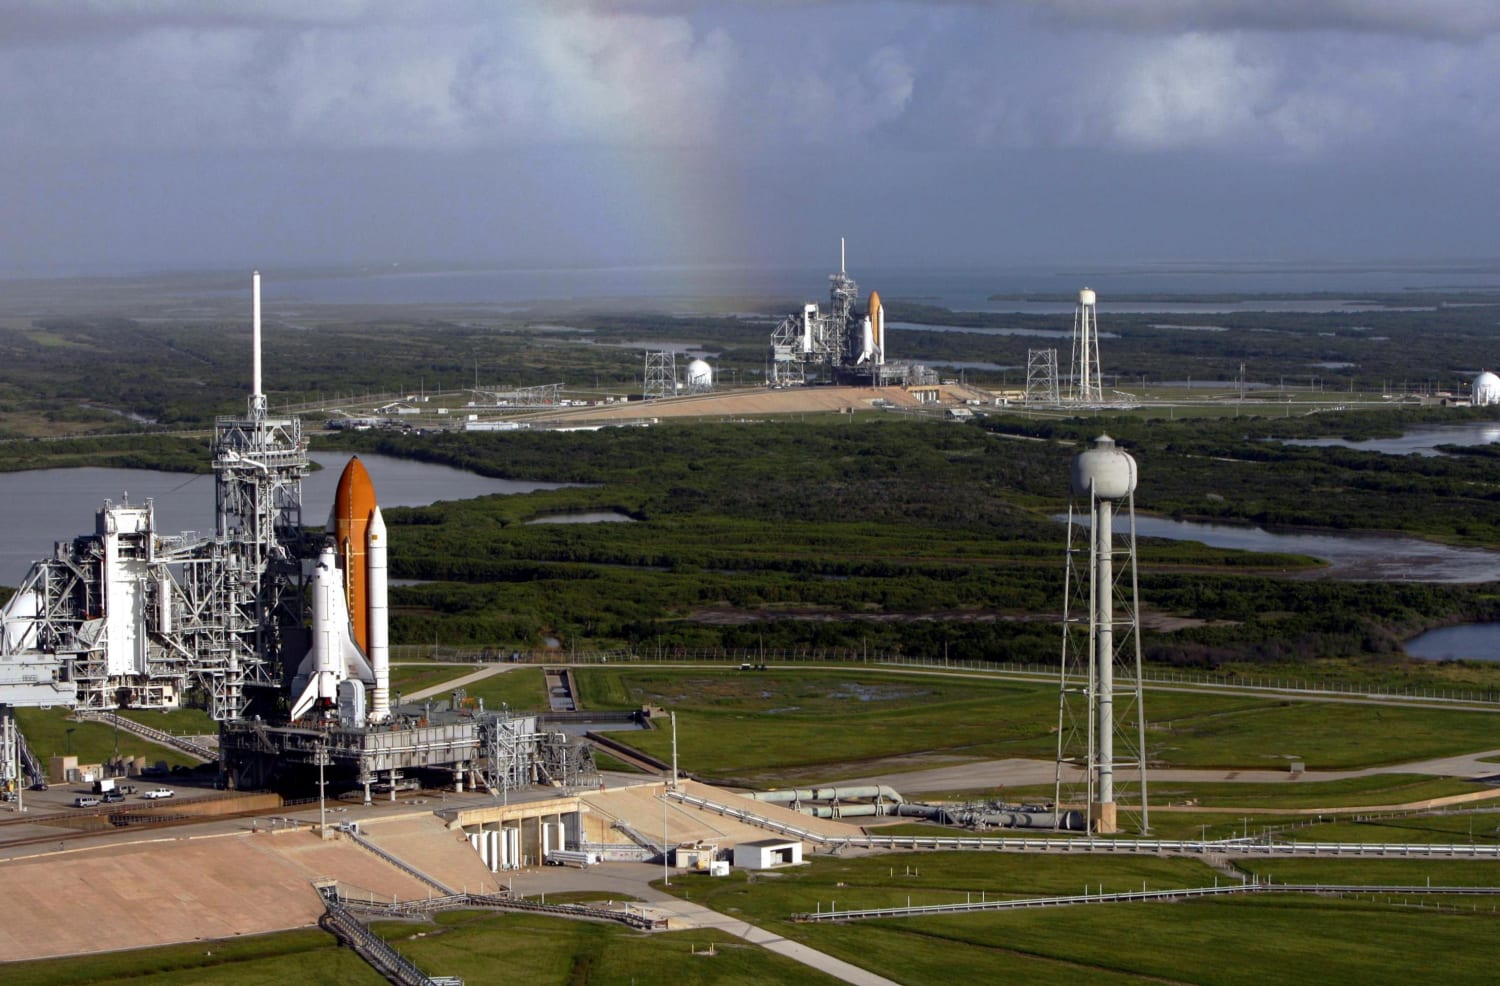 2008: Space shuttles Atlantis & Endeavour on launch pads. Endeavour stands by at pad B in the event that a rescue mission is necessary.